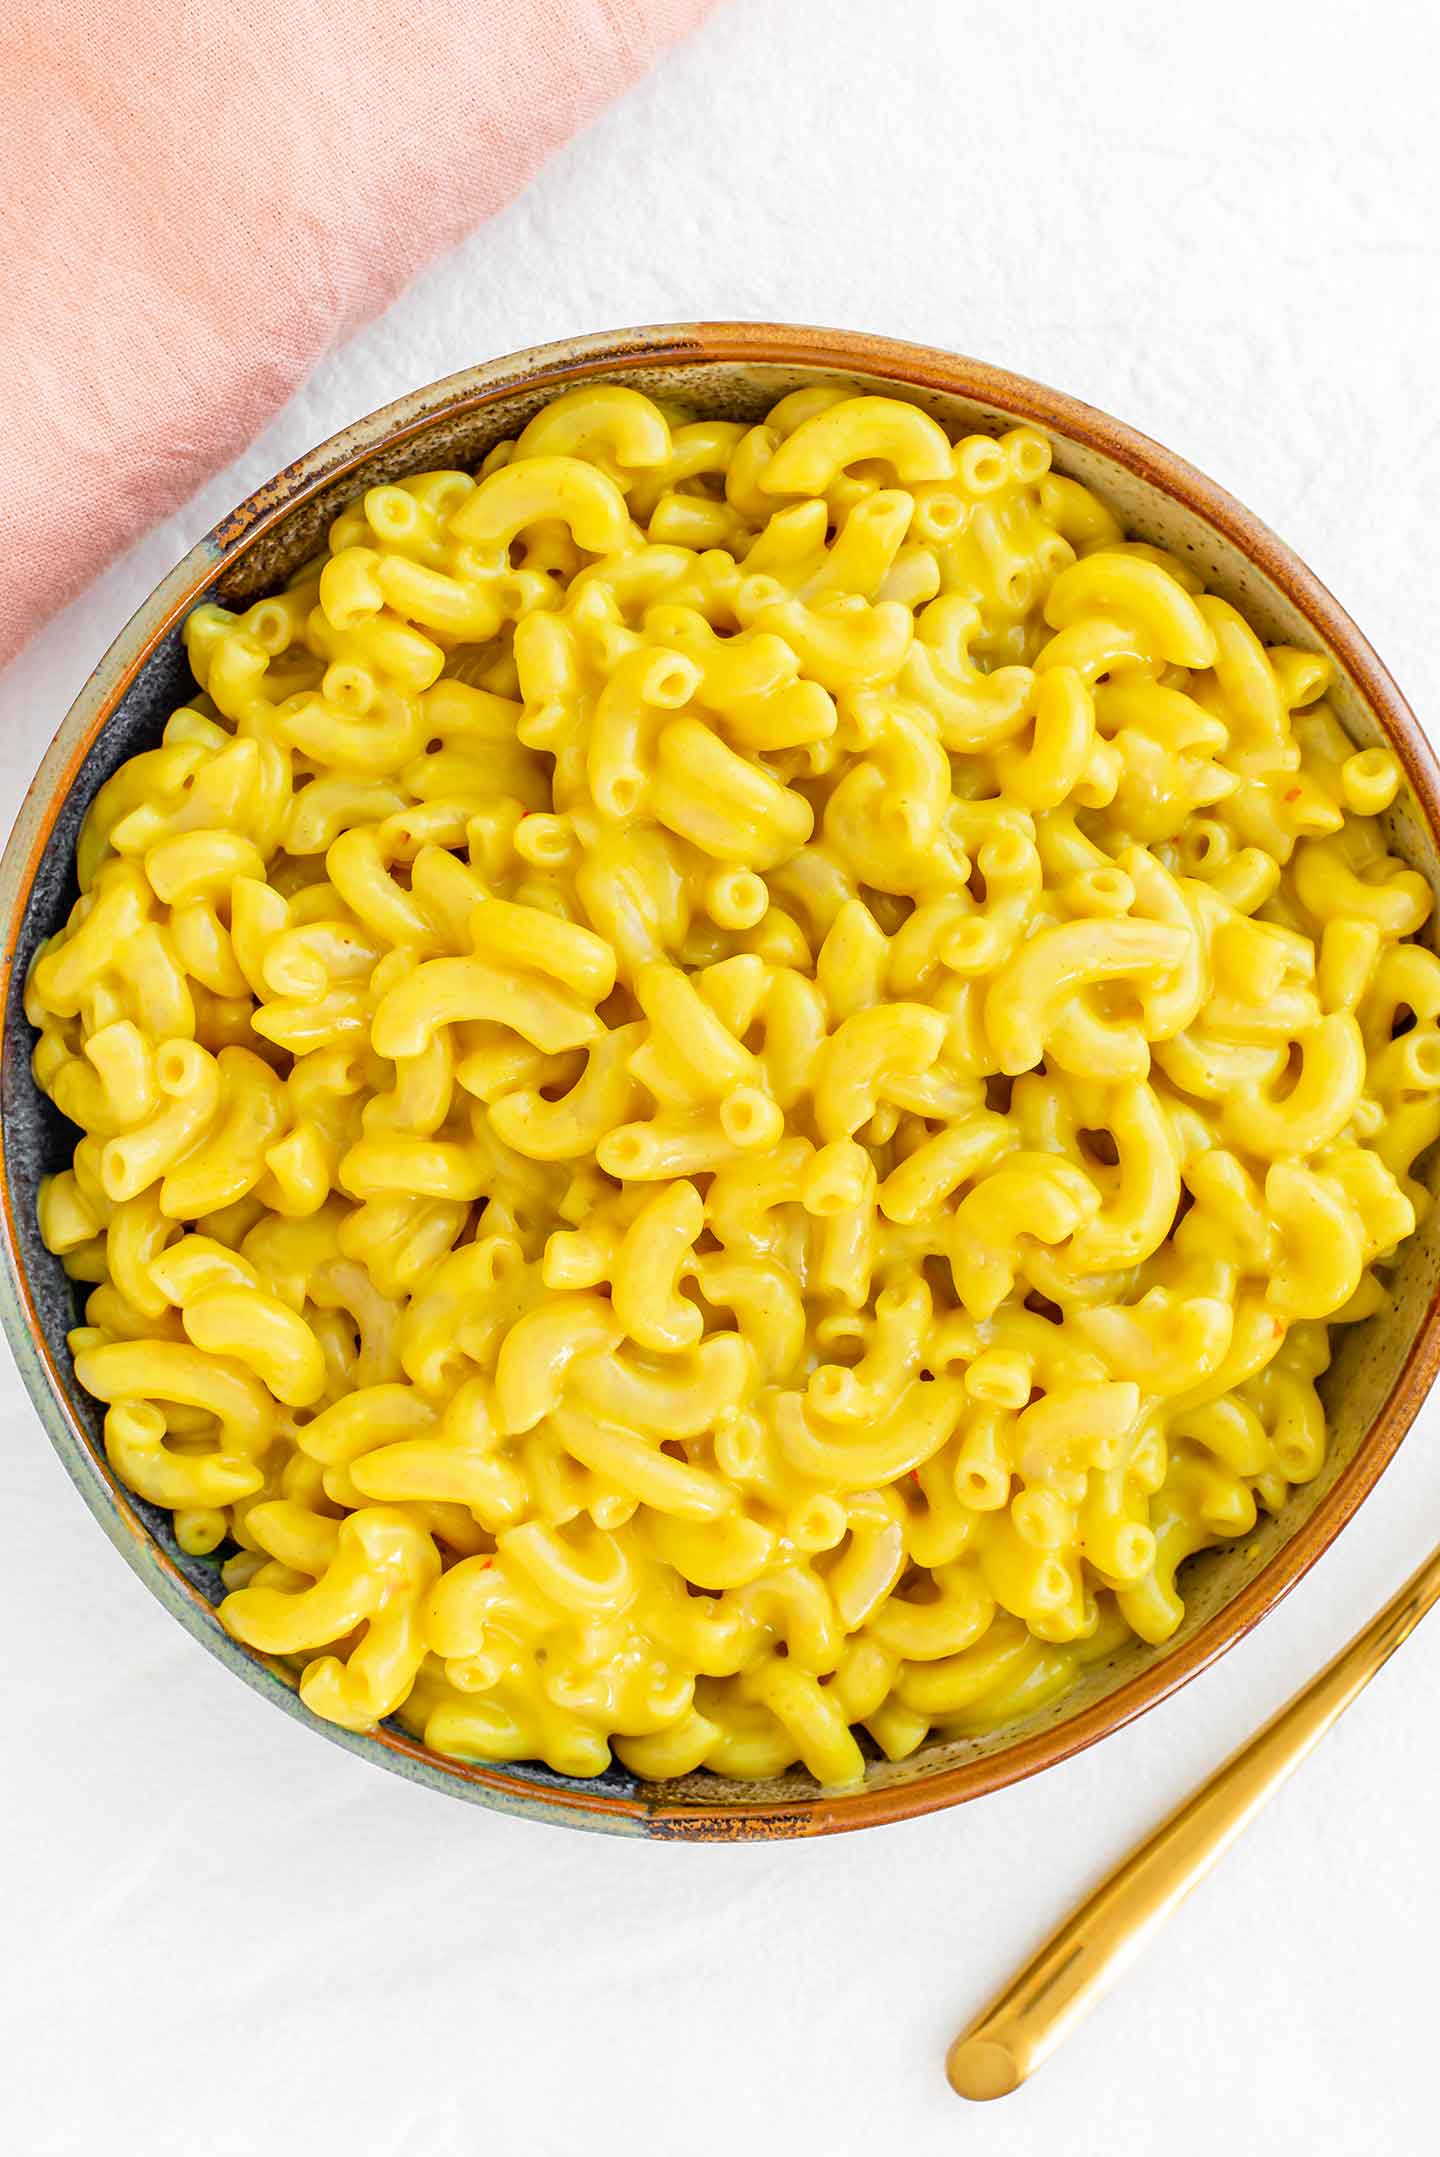 Top down view of a bowl full of yellow macaroni noodles. The noodles are covered in the creamy, "cheesy", queso mac and cheese sauce.